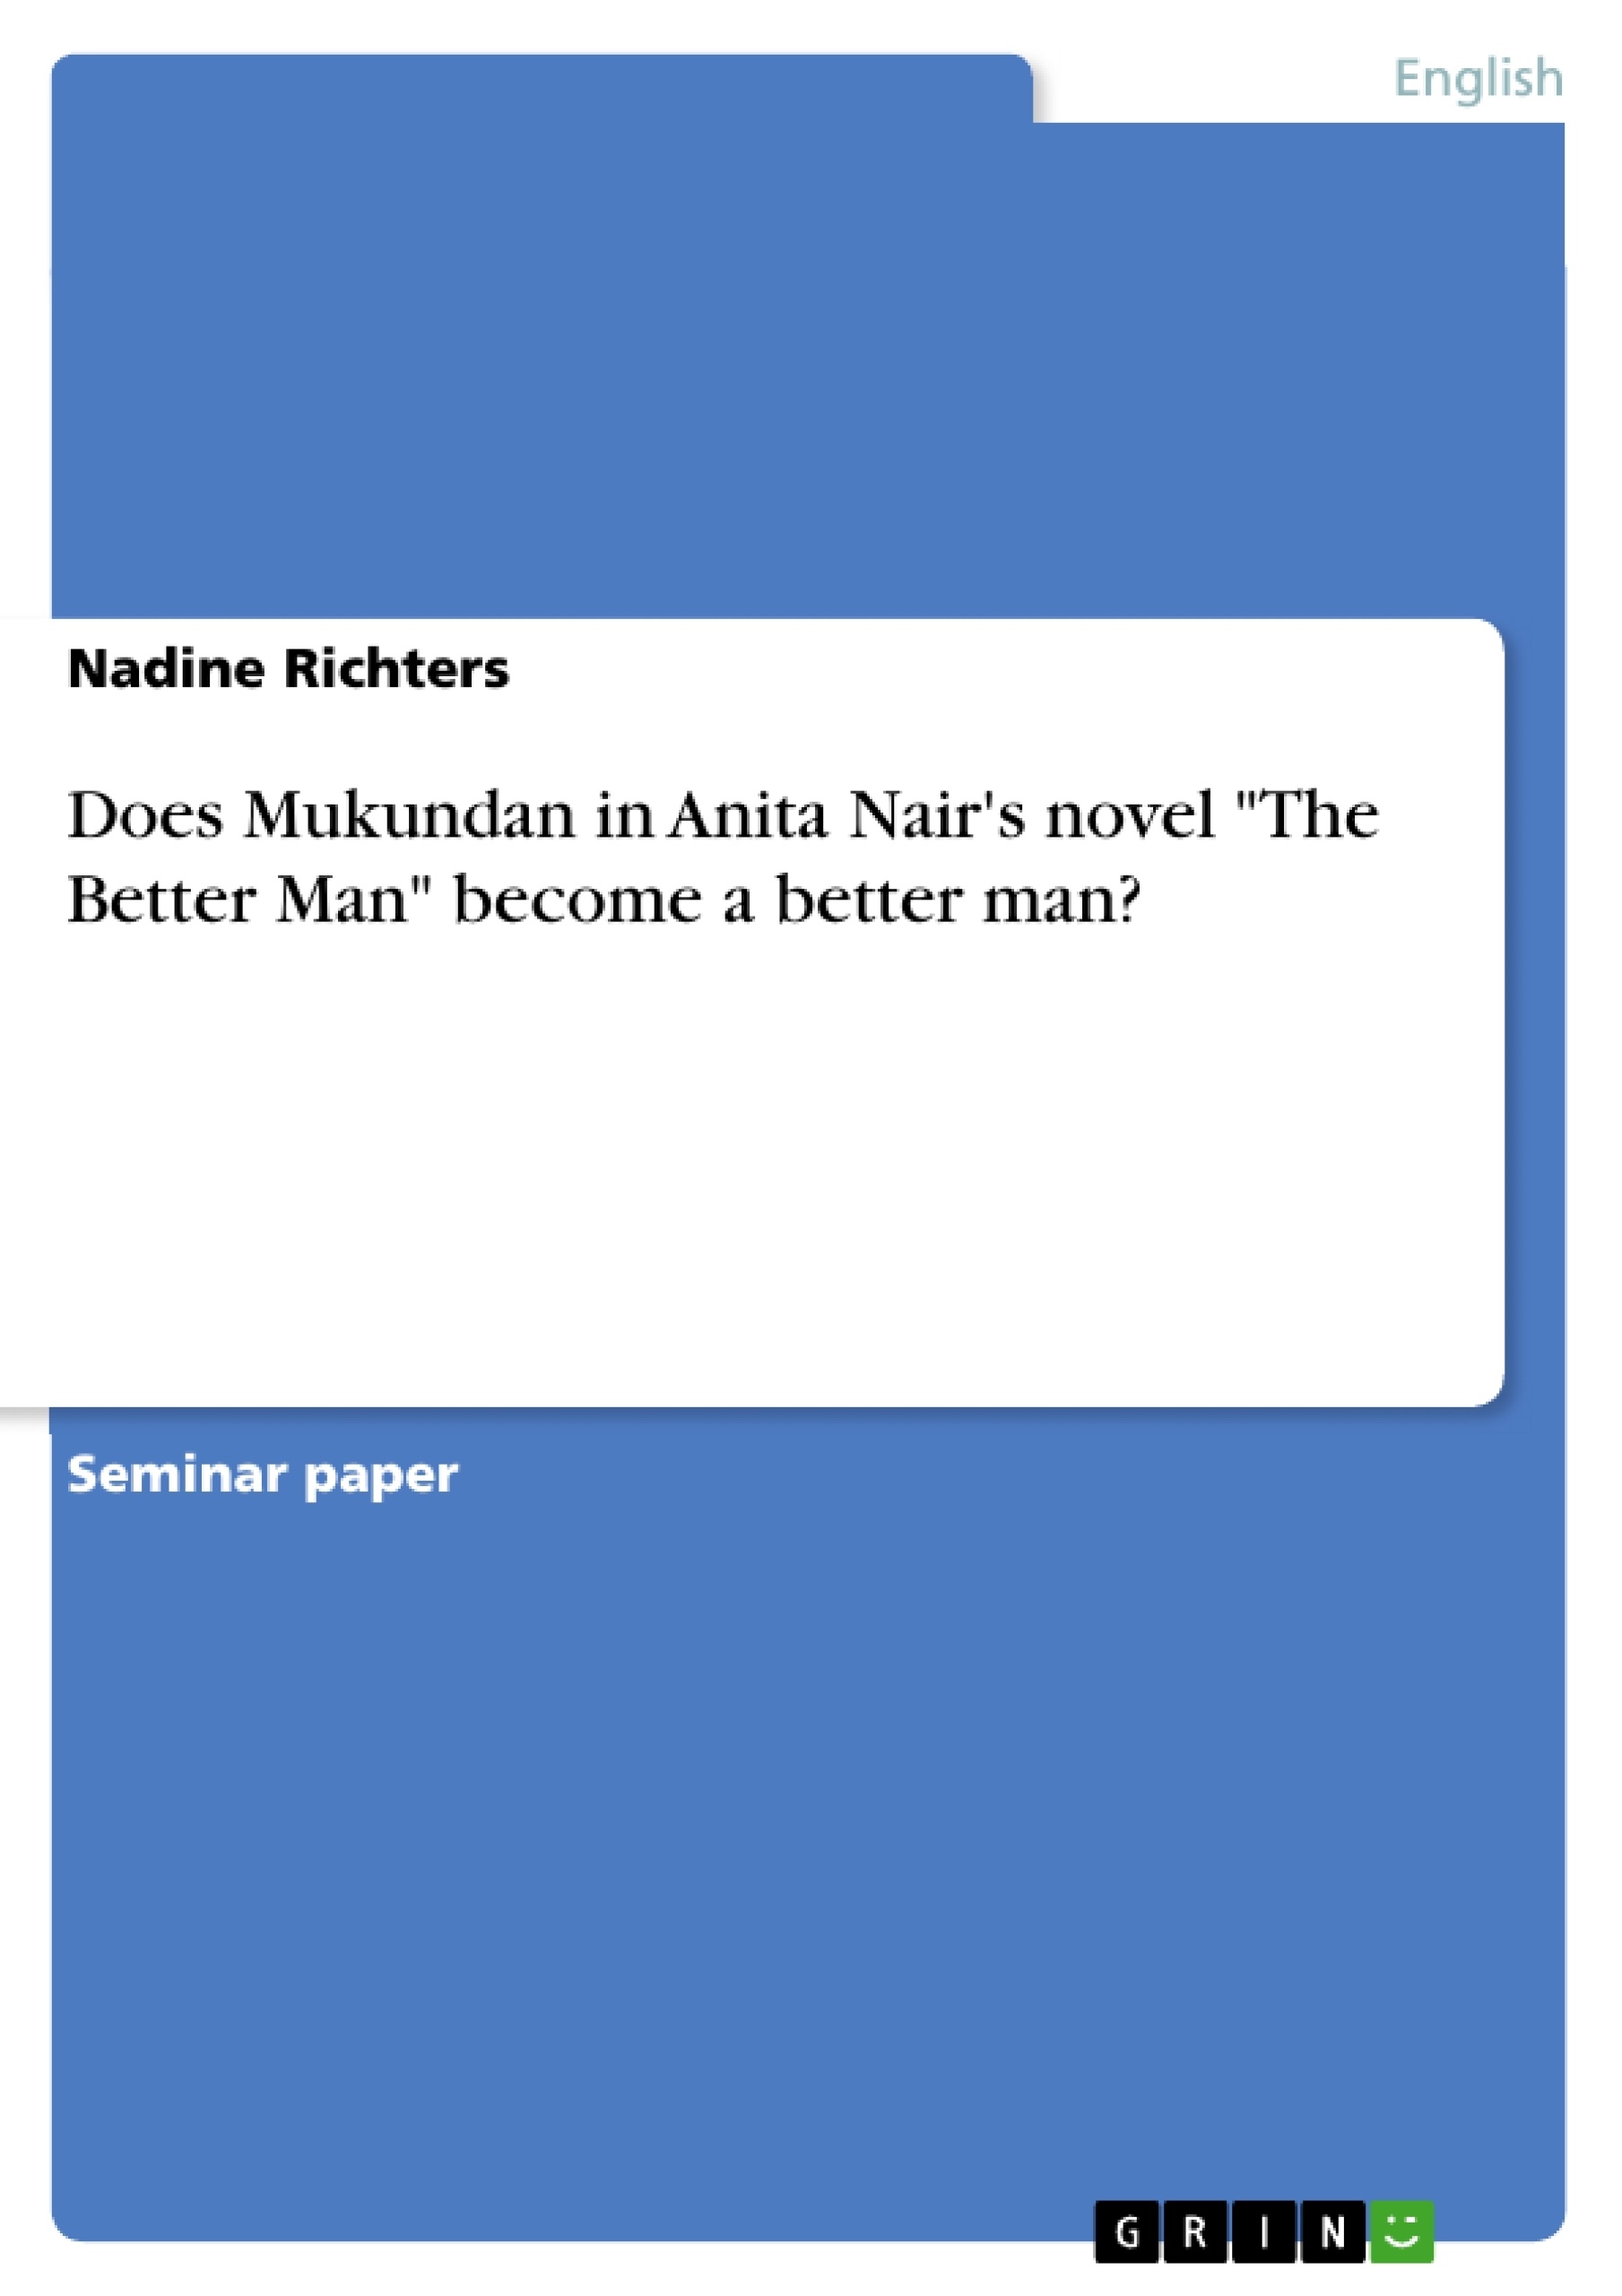 Title: Does Mukundan in Anita Nair's novel "The Better Man" become a better man?